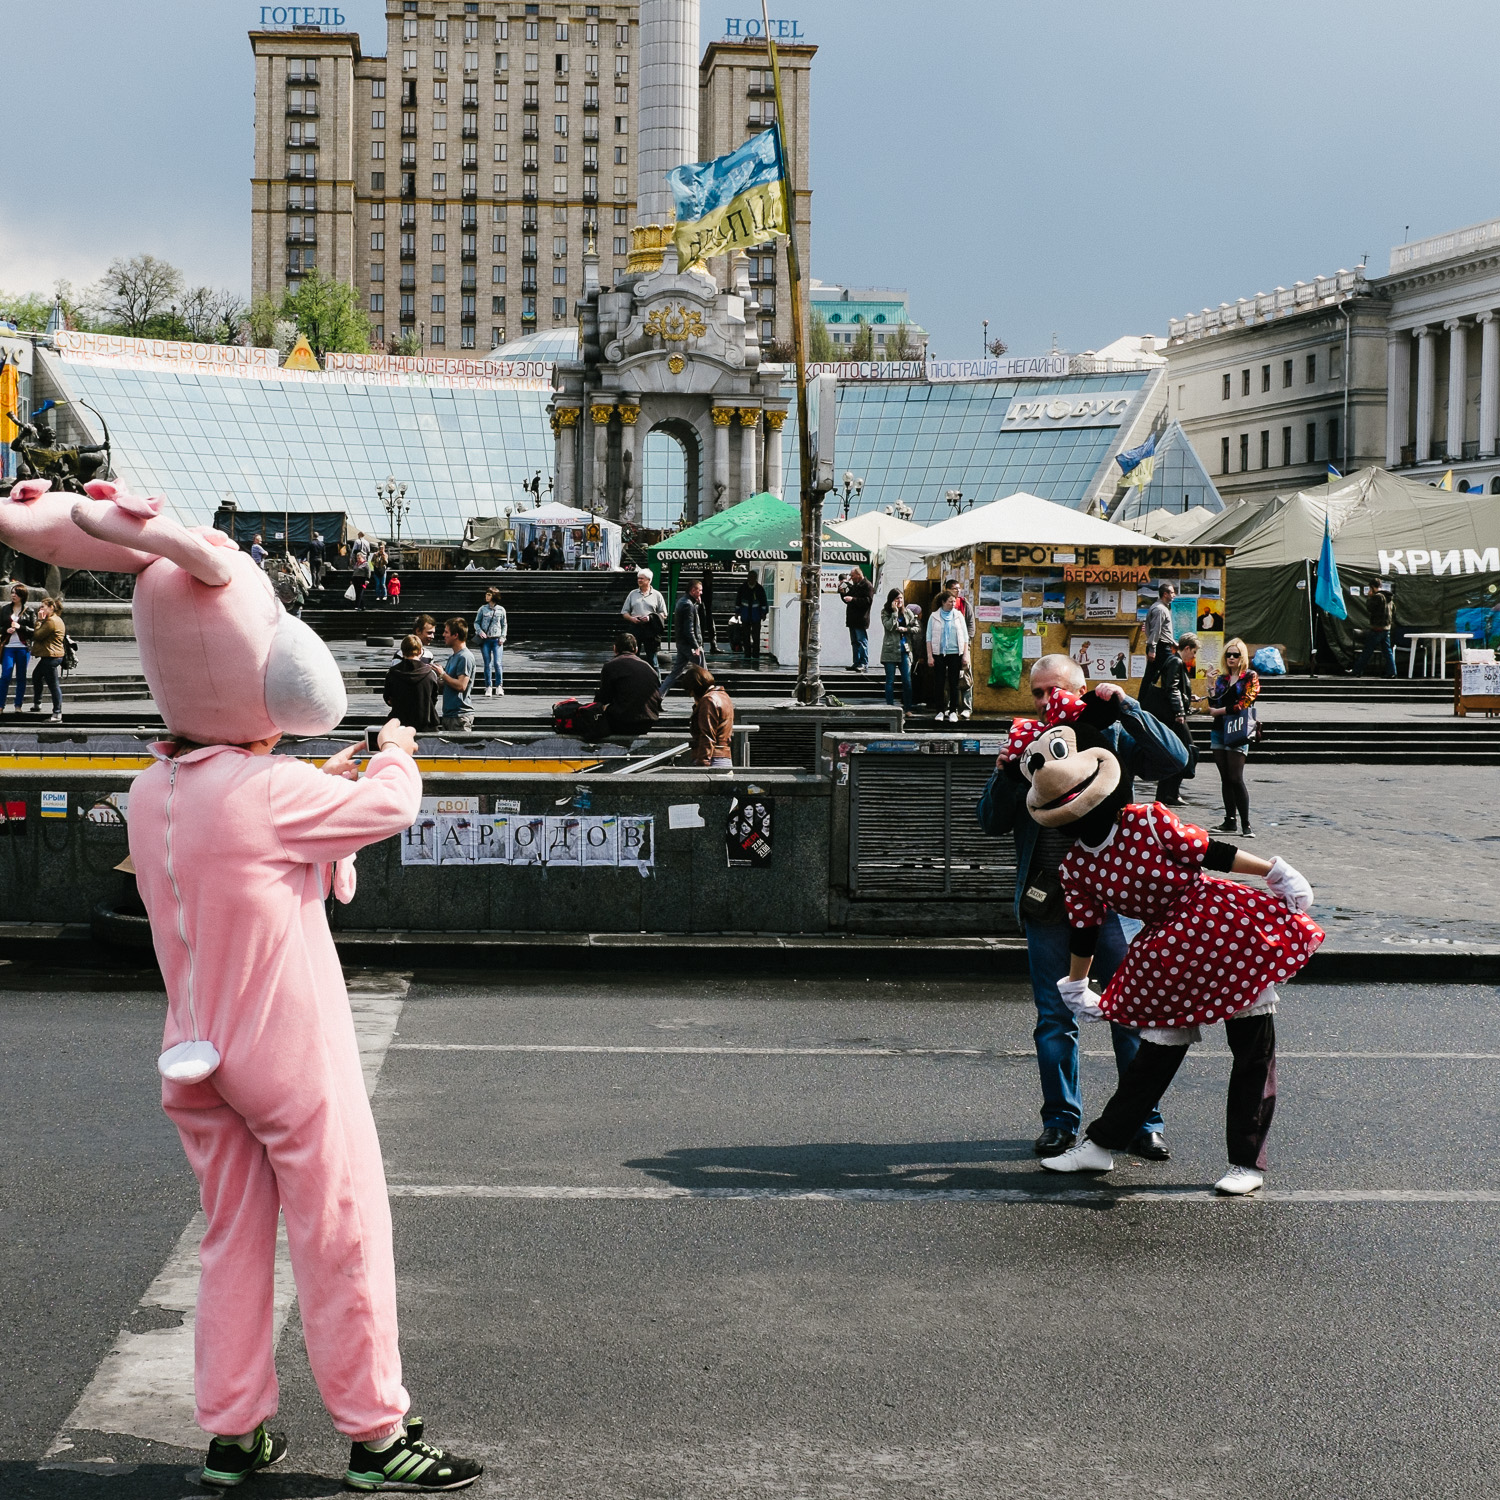  A tourist poses with workers dressed as cartoon characters on Kyiv's Independence Square, April 2014. 